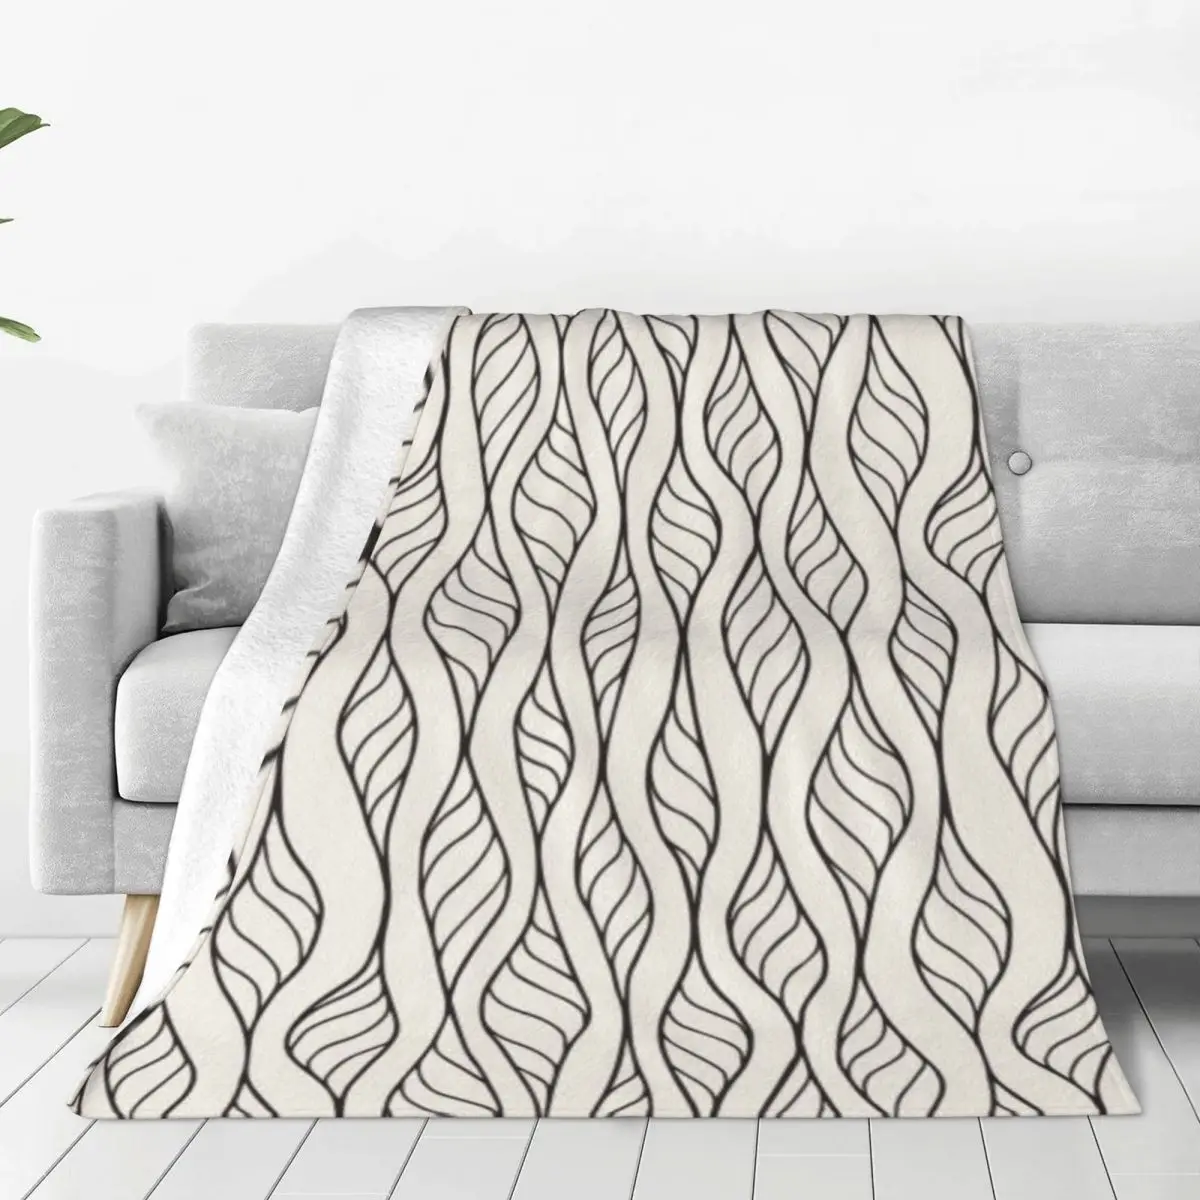 

Art Leaf Bedspread Bed Throw Blanket Aesthetic Decor Sofa Blanket minimalist lines All-match the creative washable Anti-pilling